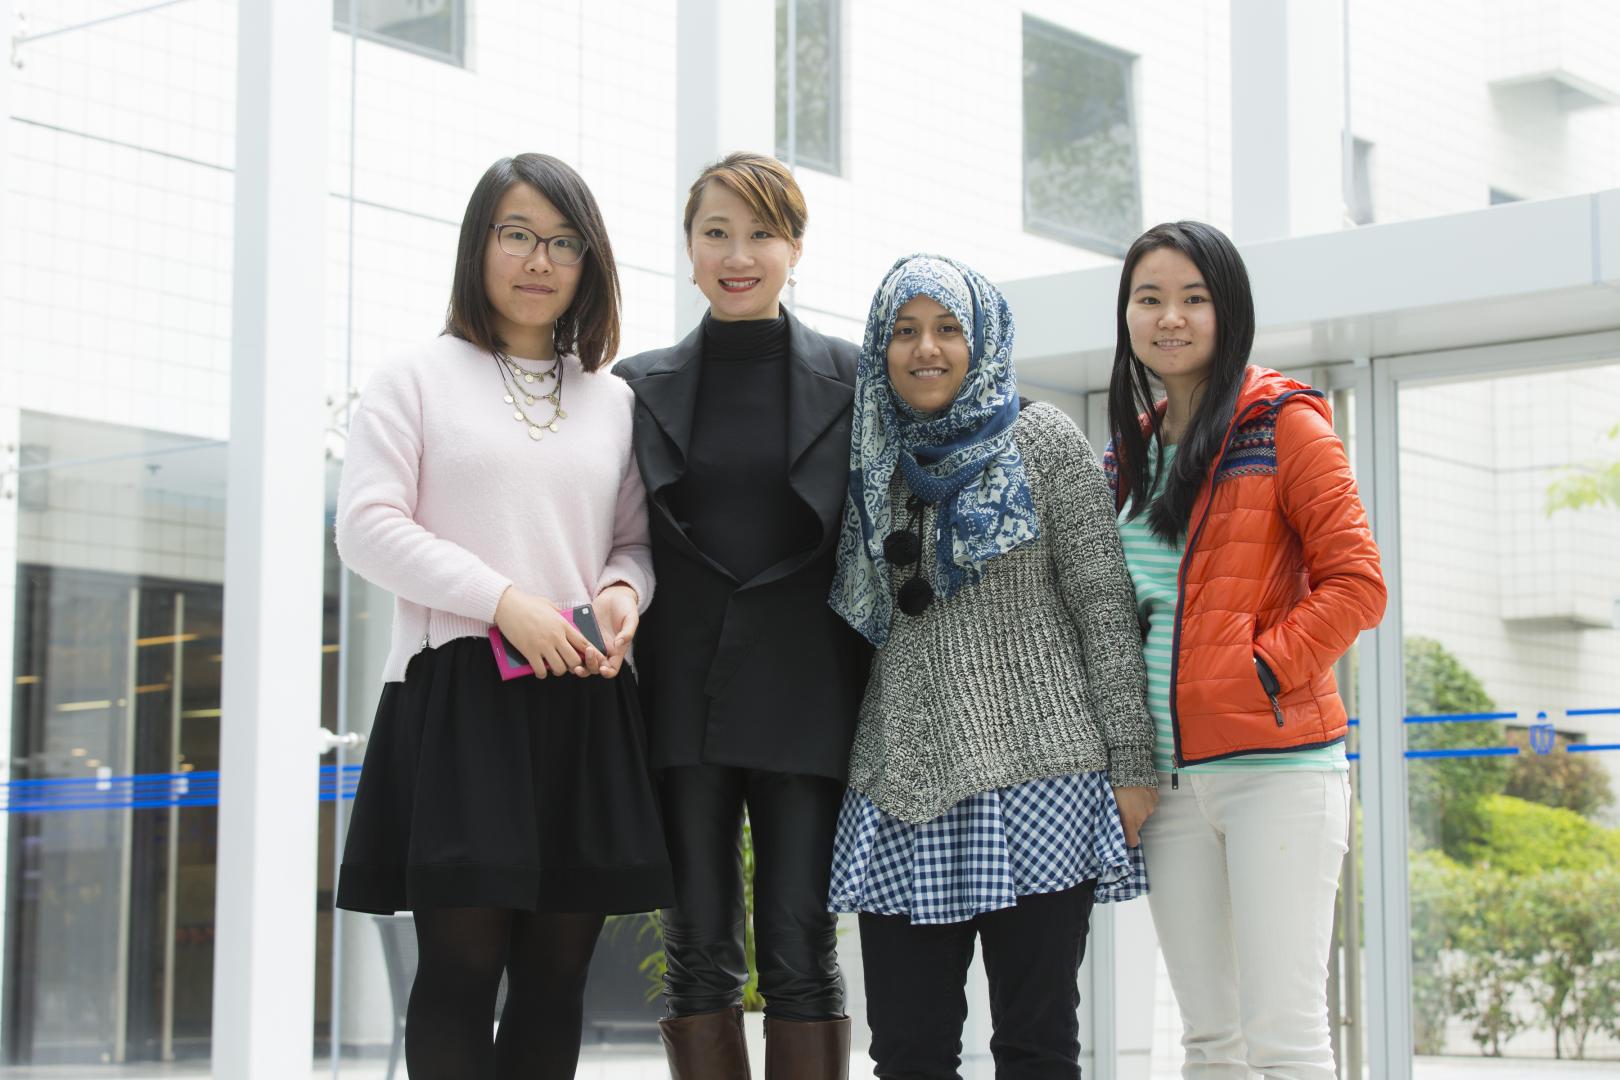 Prof. Fung with students